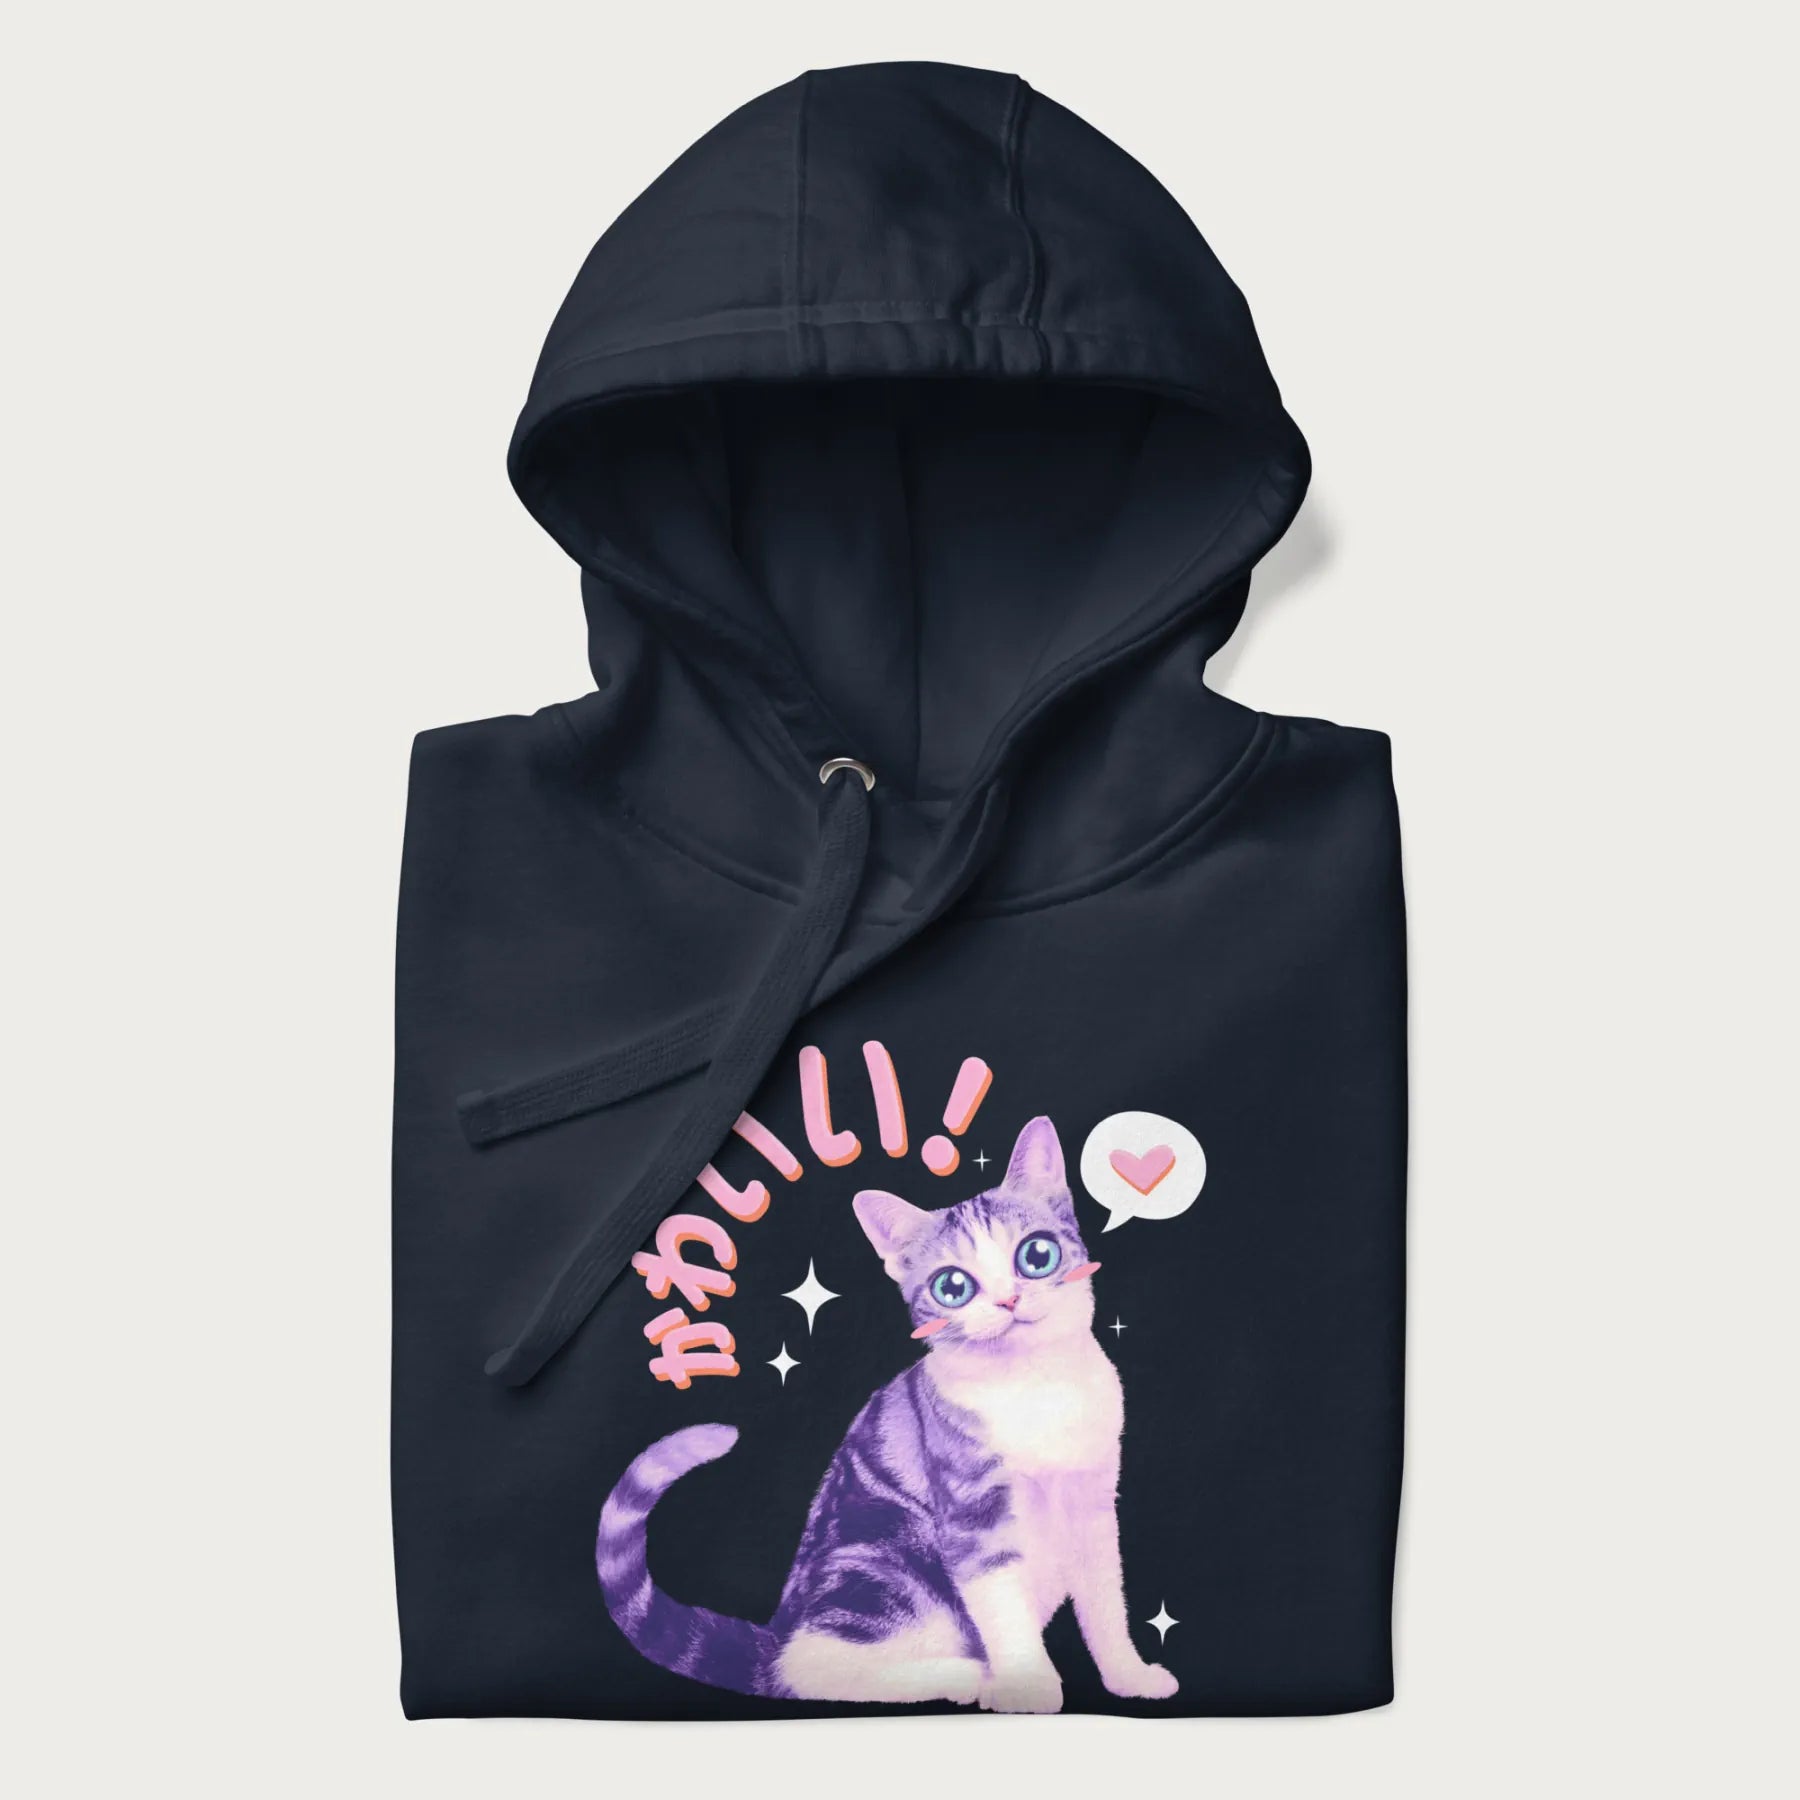 Folded navy blue hoodie with a graphic of a blue-eyed kitten and Japanese kawaii-style lettering, stars, and a heart.